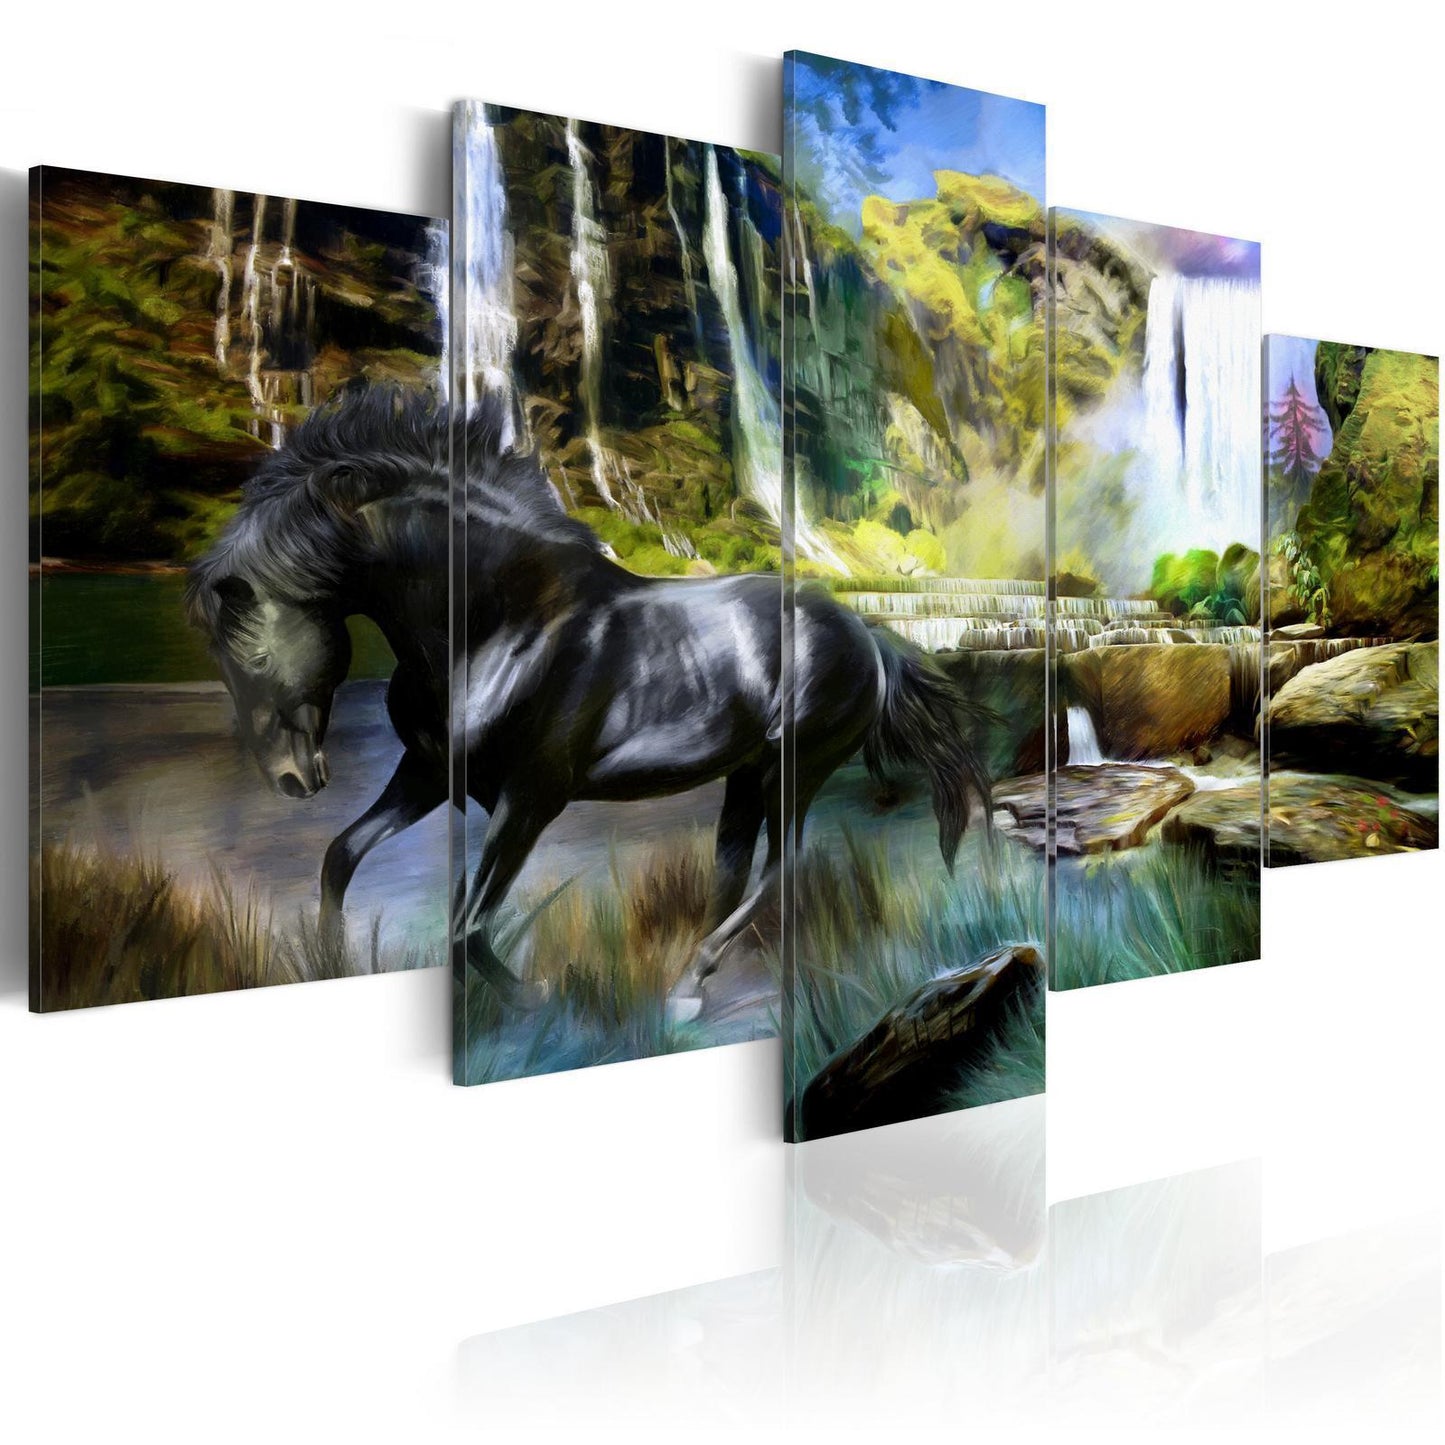 Schilderij - Black horse on the background of paradise waterfall